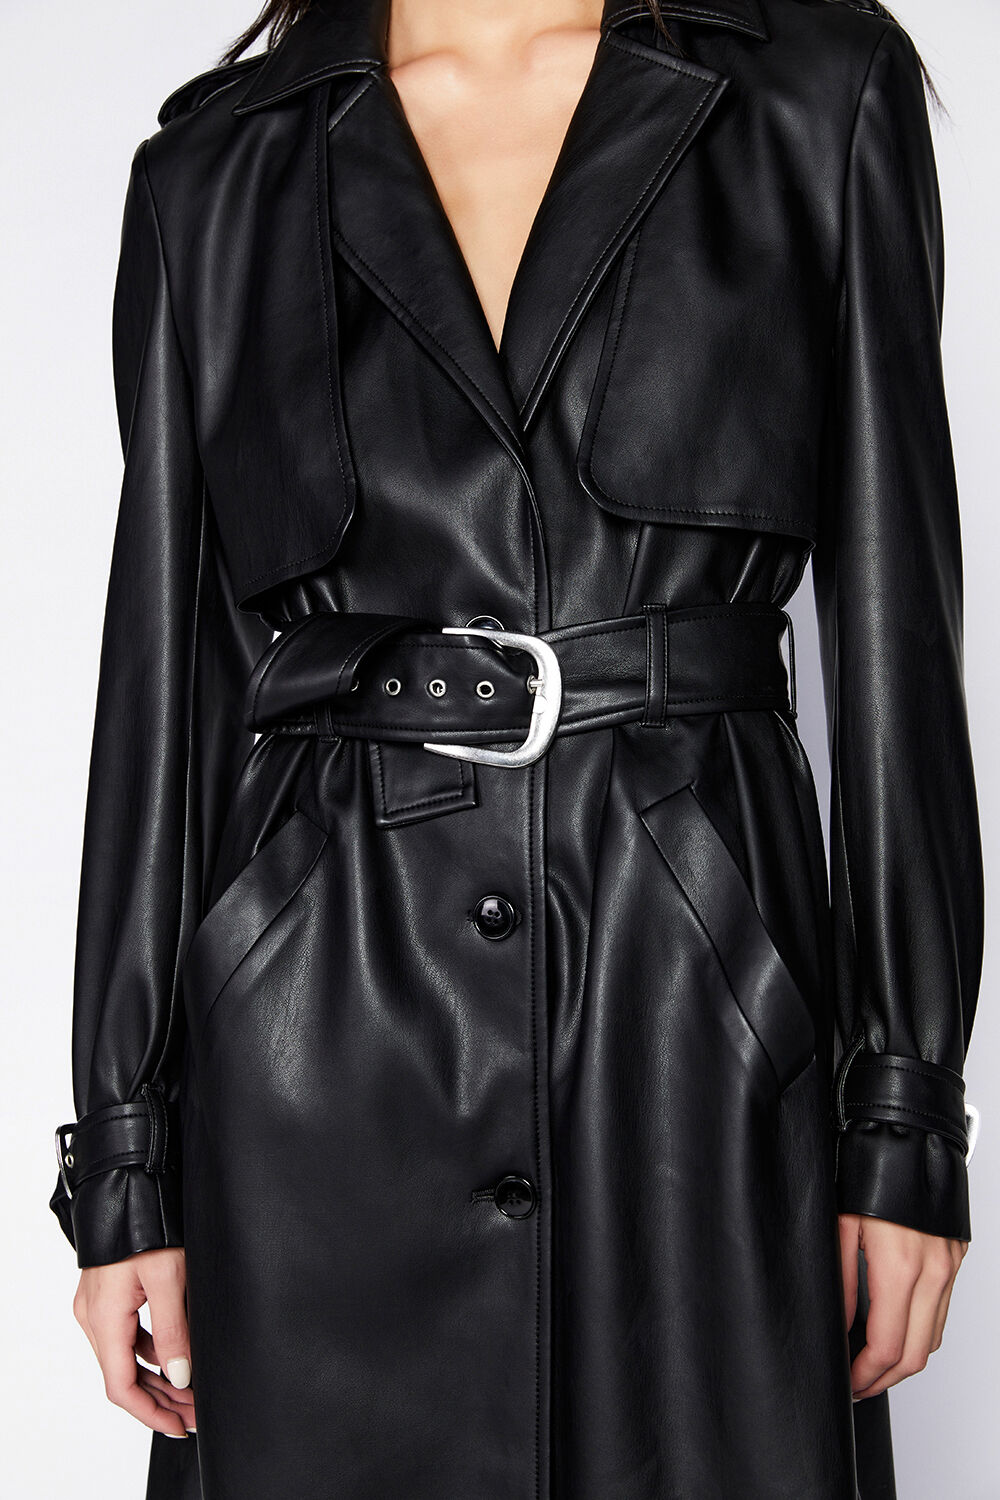 VEGAN LEATHER TRENCH COAT in colour CAVIAR